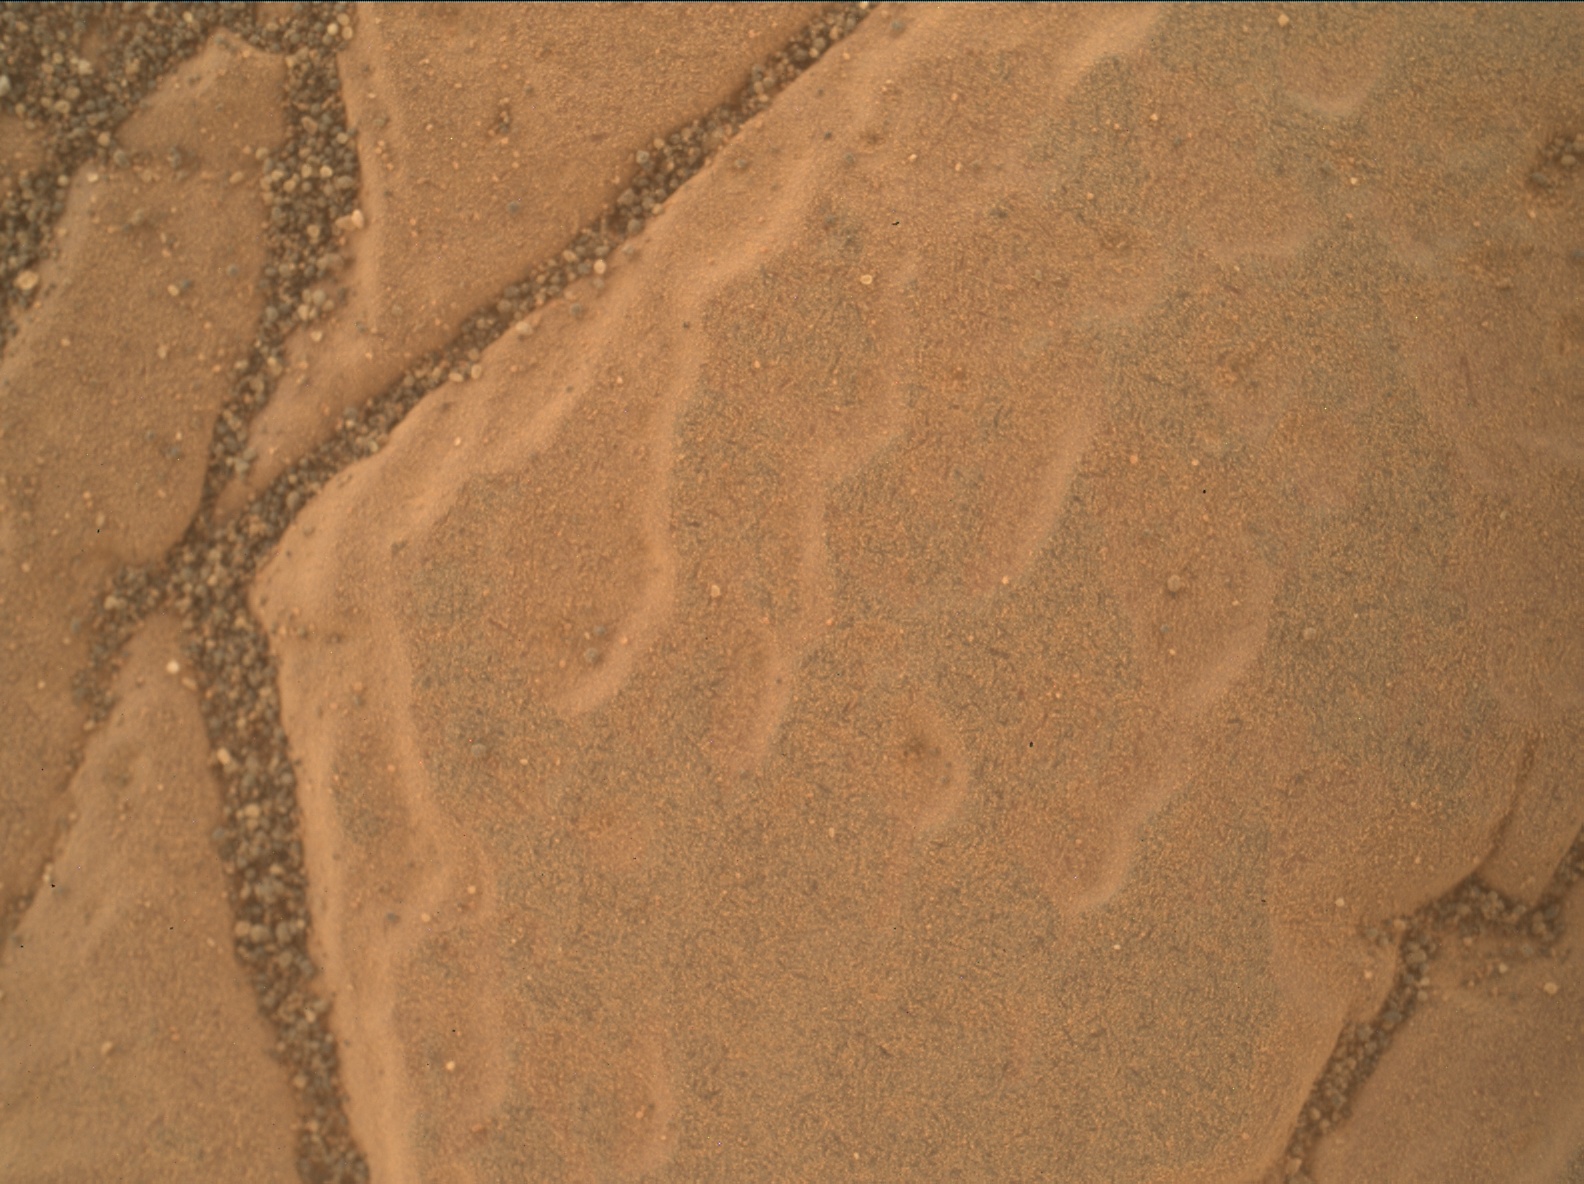 Nasa's Mars rover Curiosity acquired this image using its Mars Hand Lens Imager (MAHLI) on Sol 3013